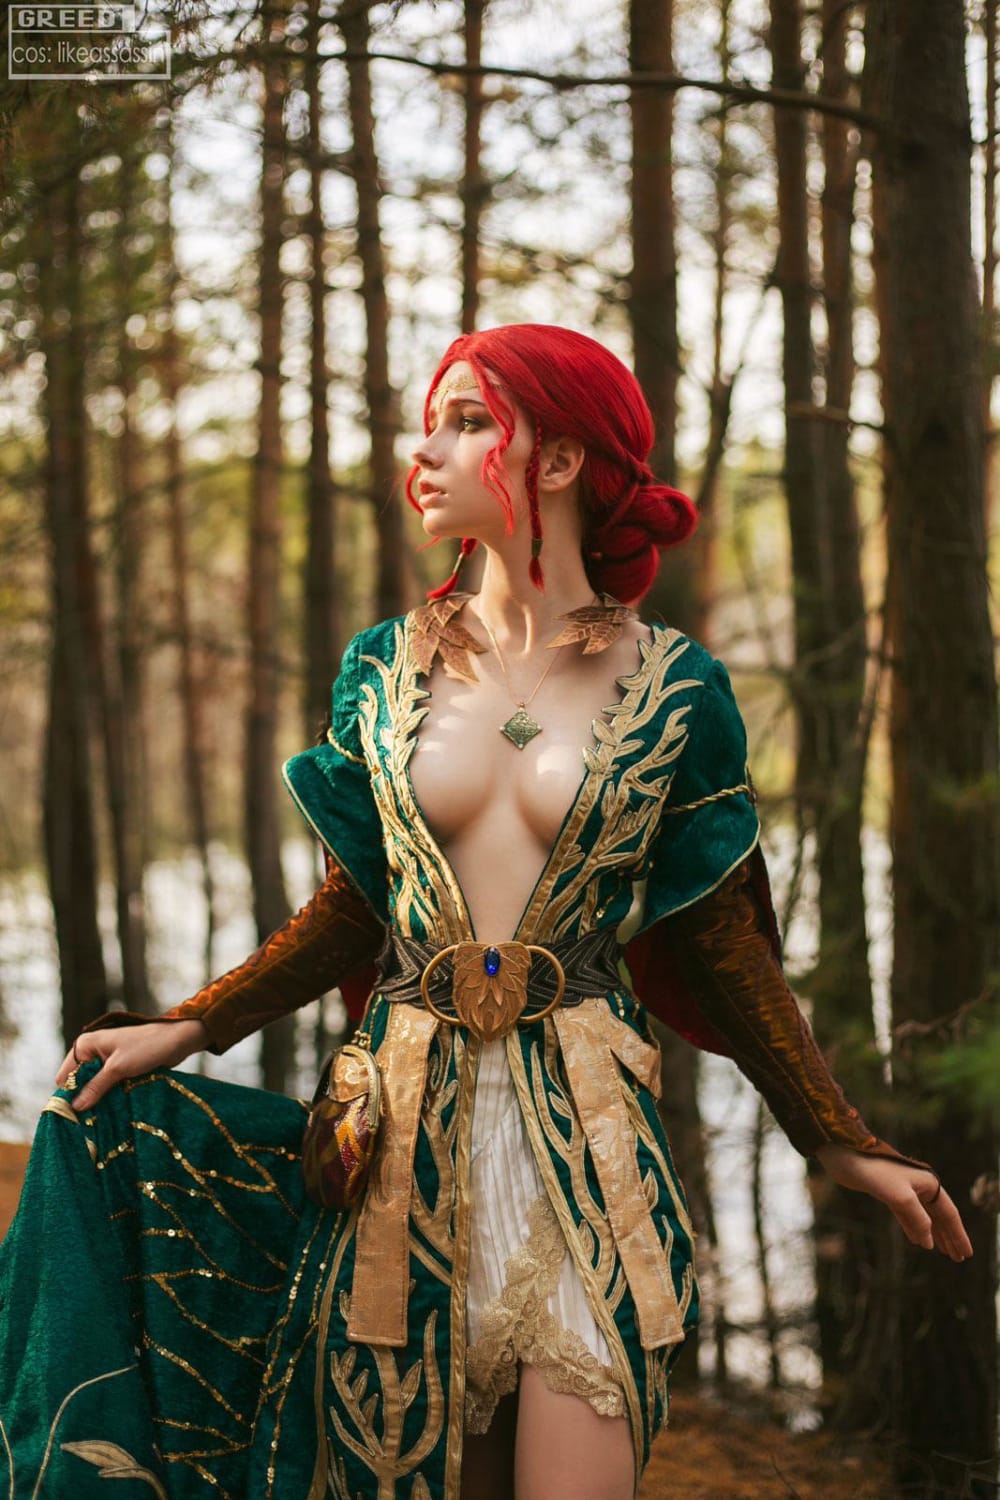 My Triss Merigold cosplay from The Witcher